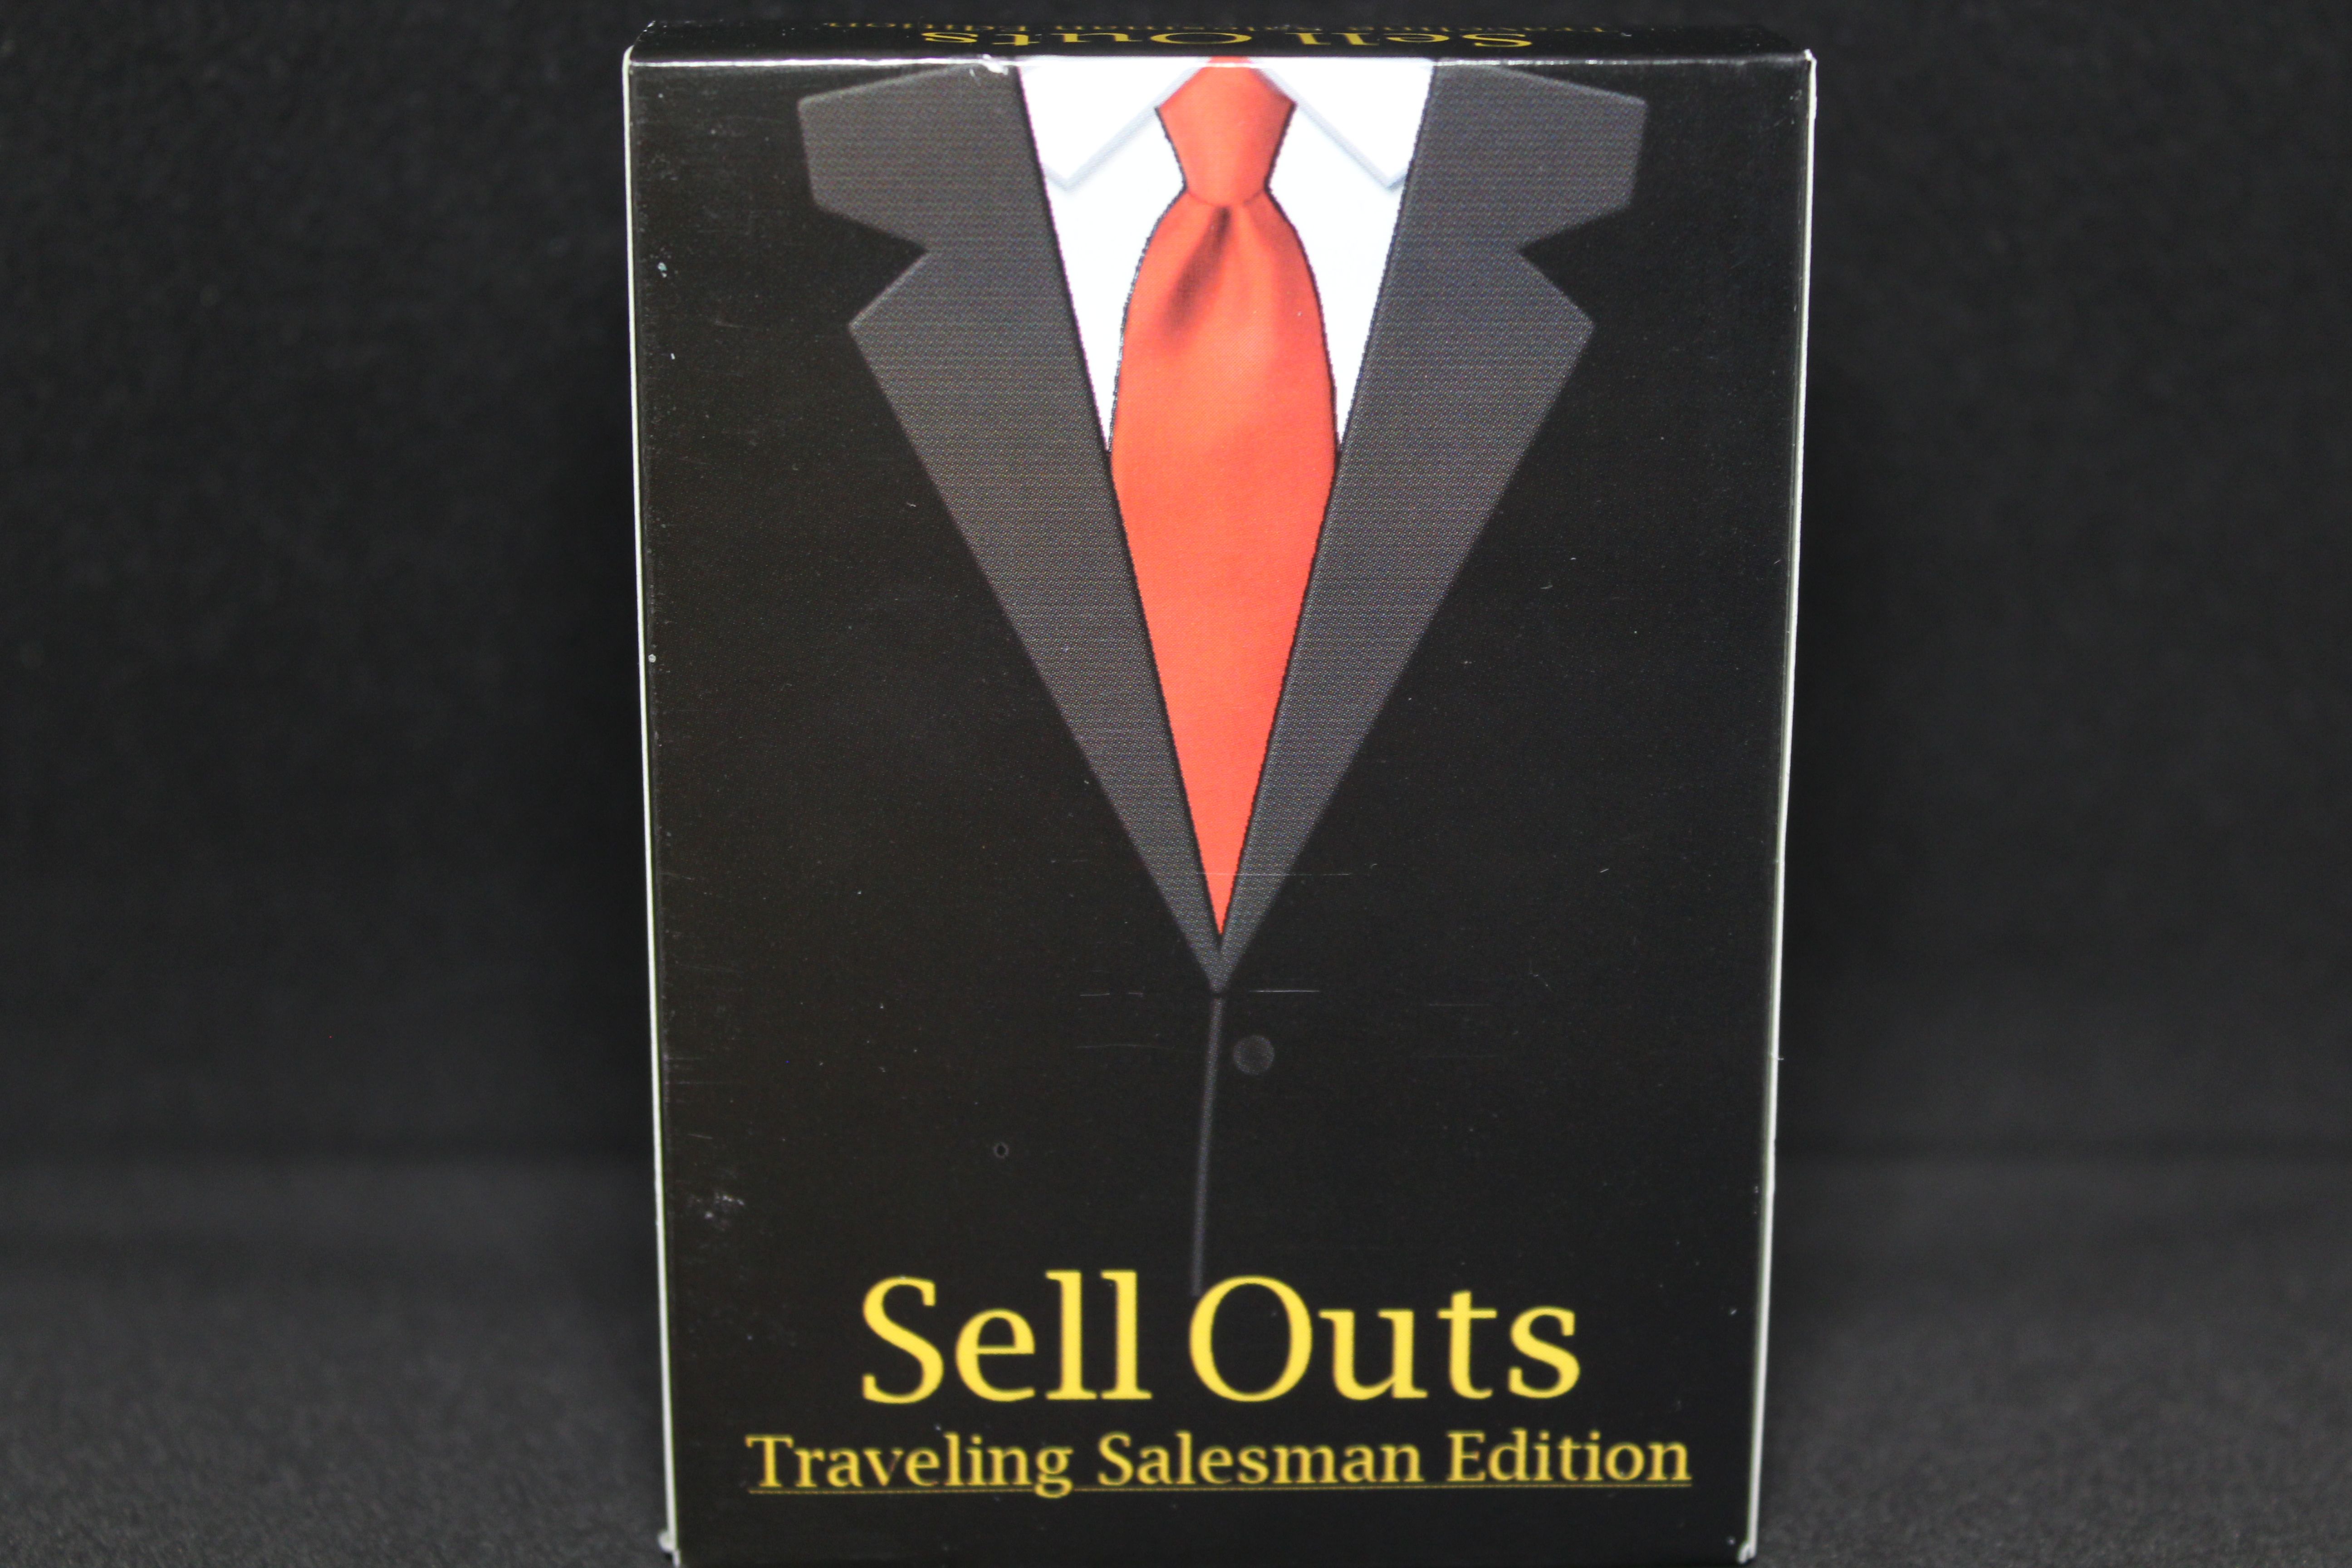 Sell Outs: Traveling Salesman Edition